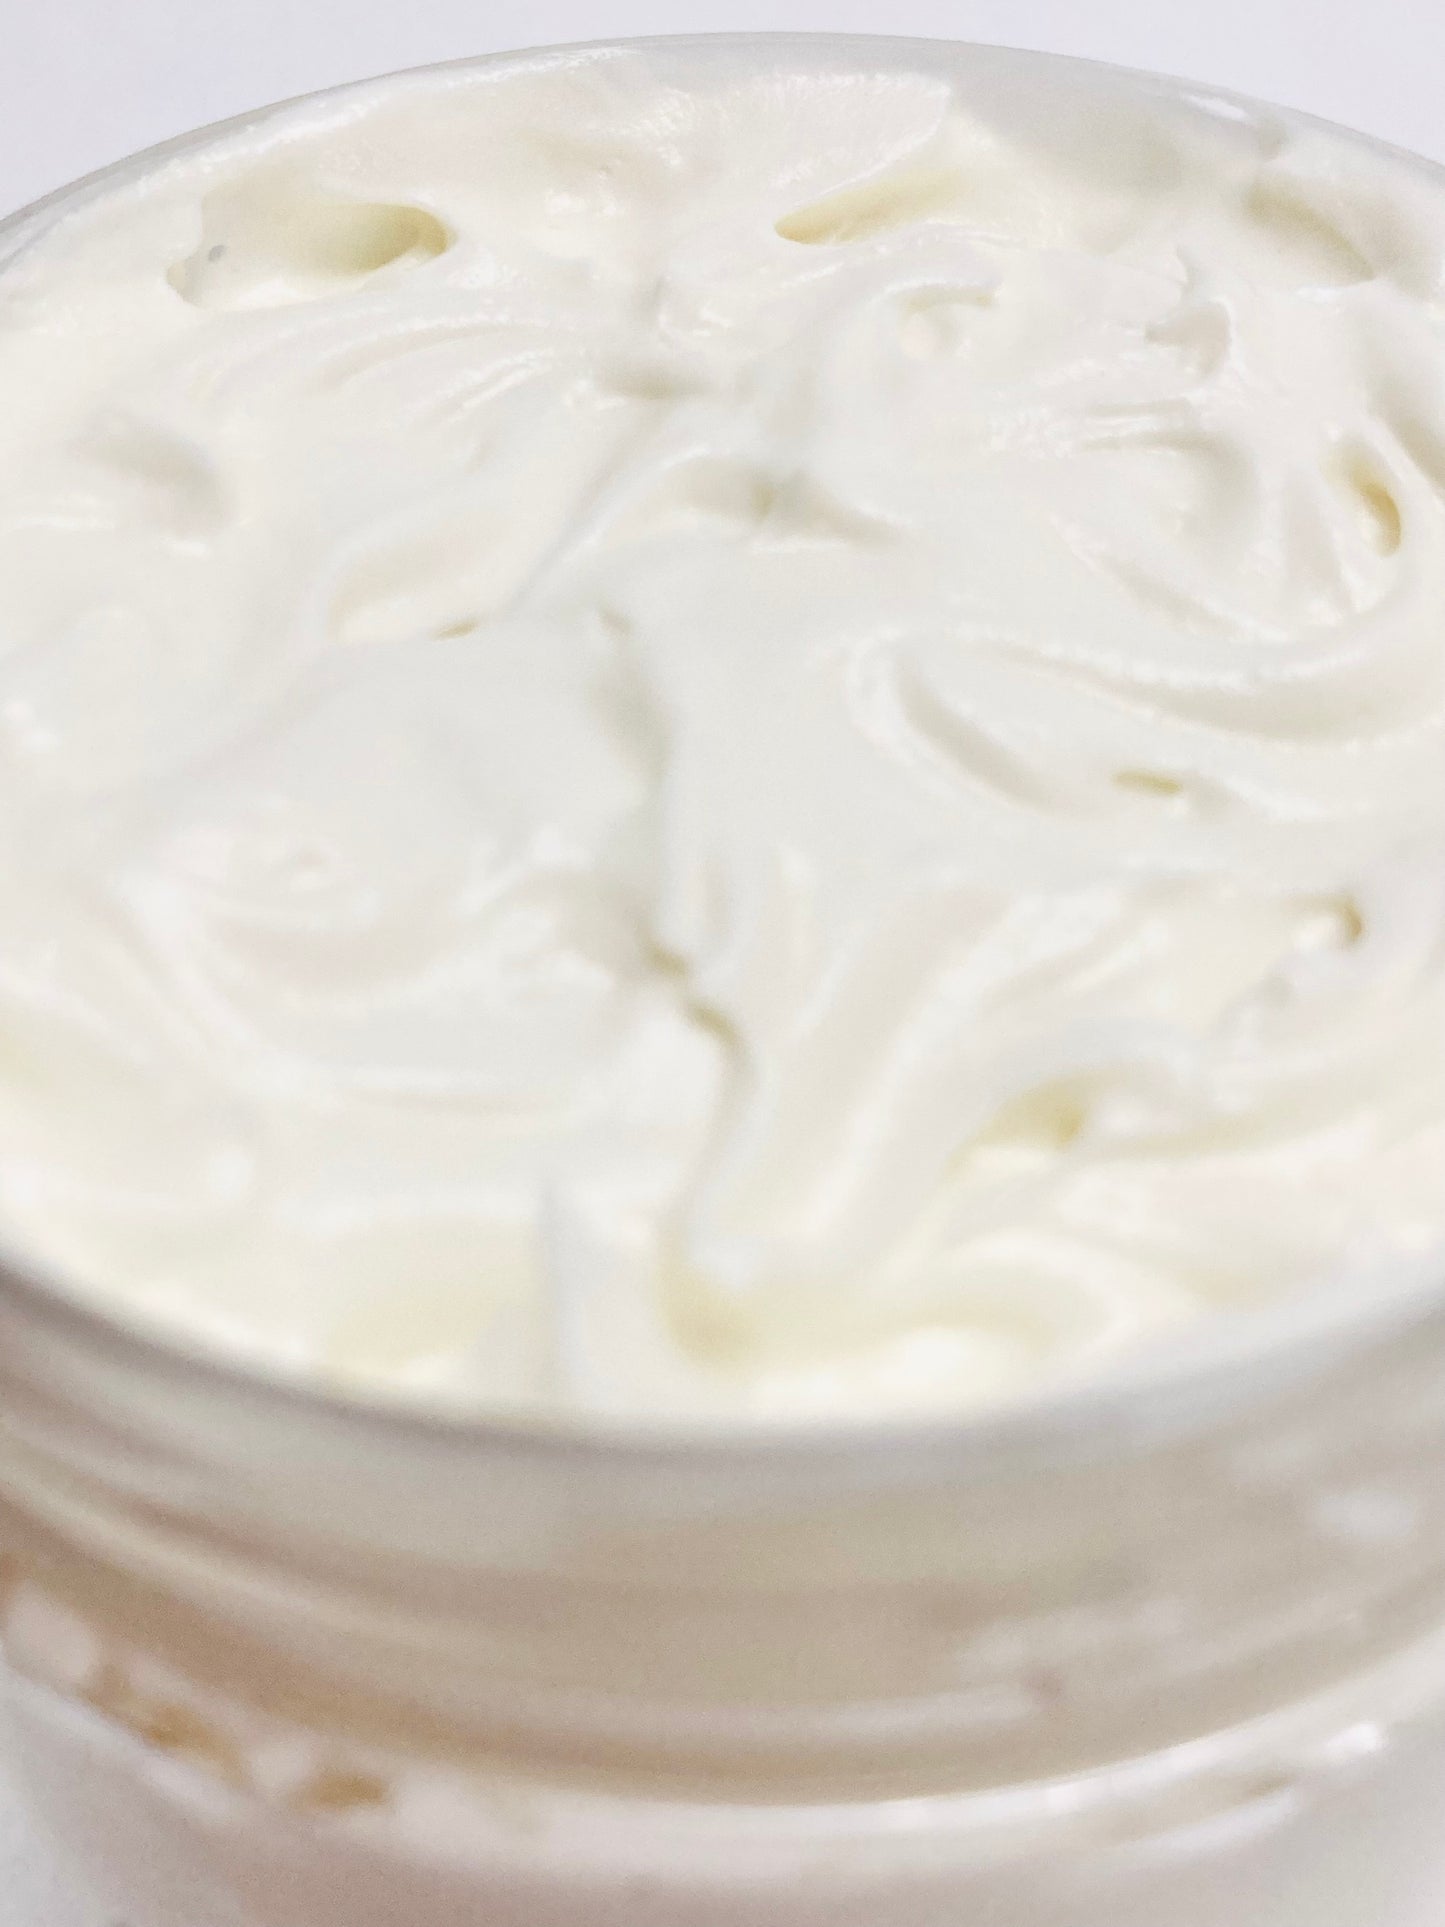 Coco Rose Body Butter